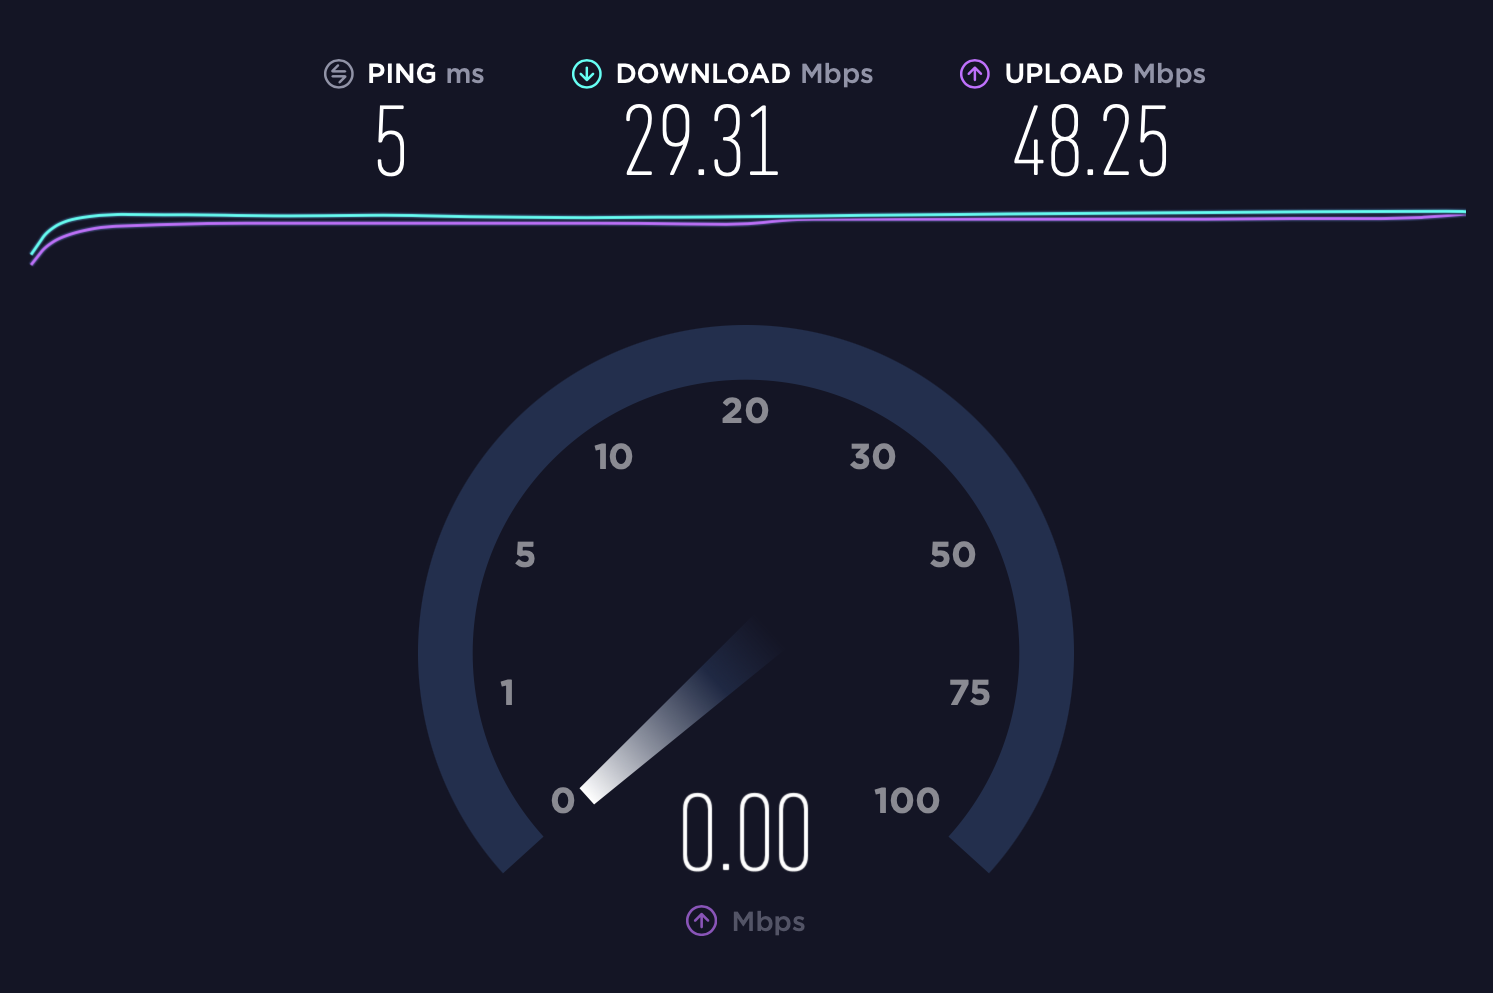 what is considered a good download and upload speed